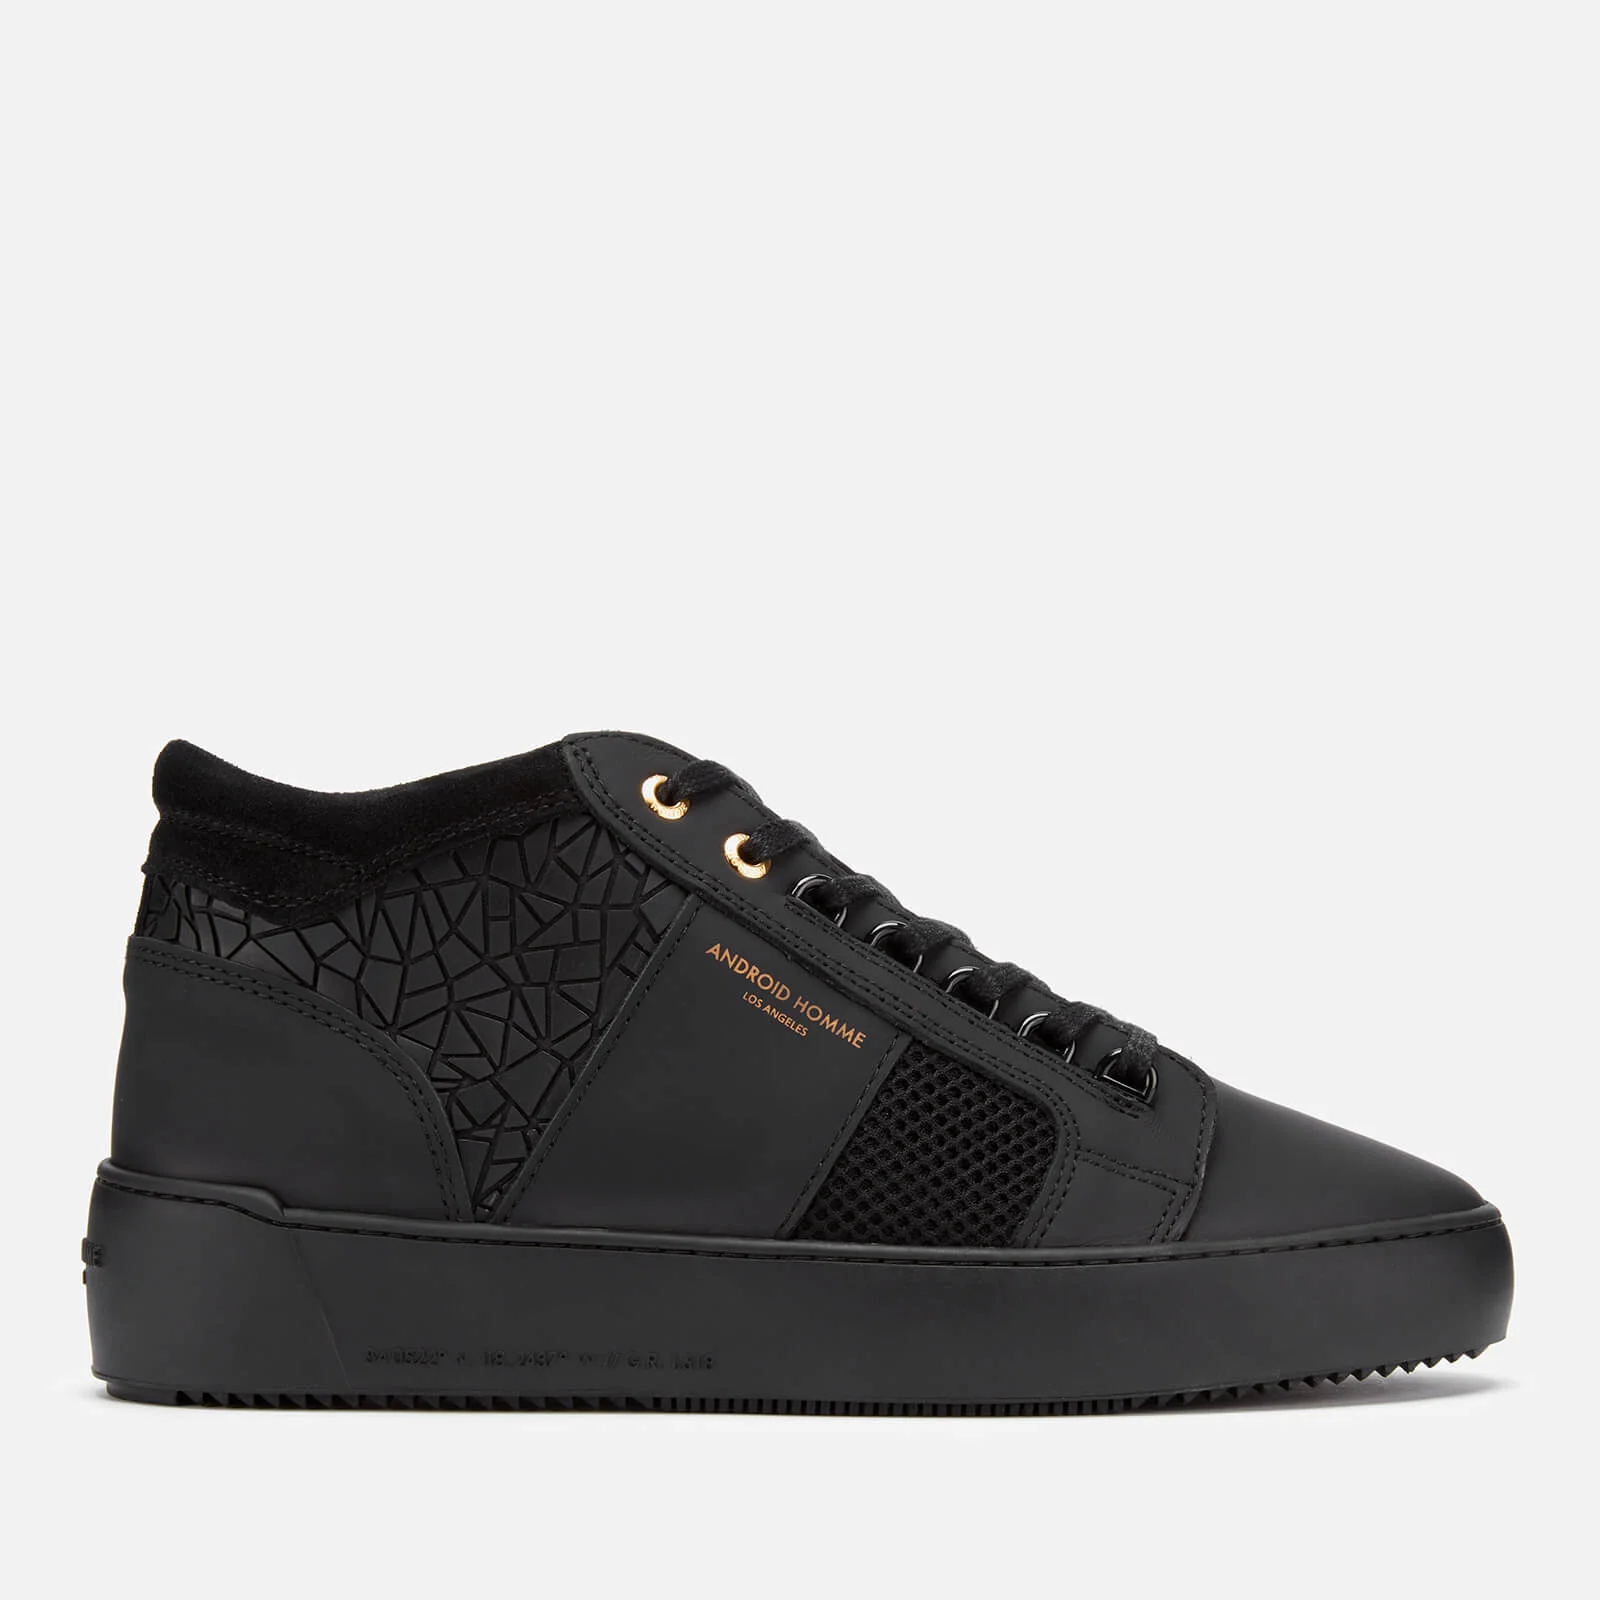 Android Homme Men's Propulsion Mid Geo Trainers - Black Rubber Mosaic Mesh Image 1